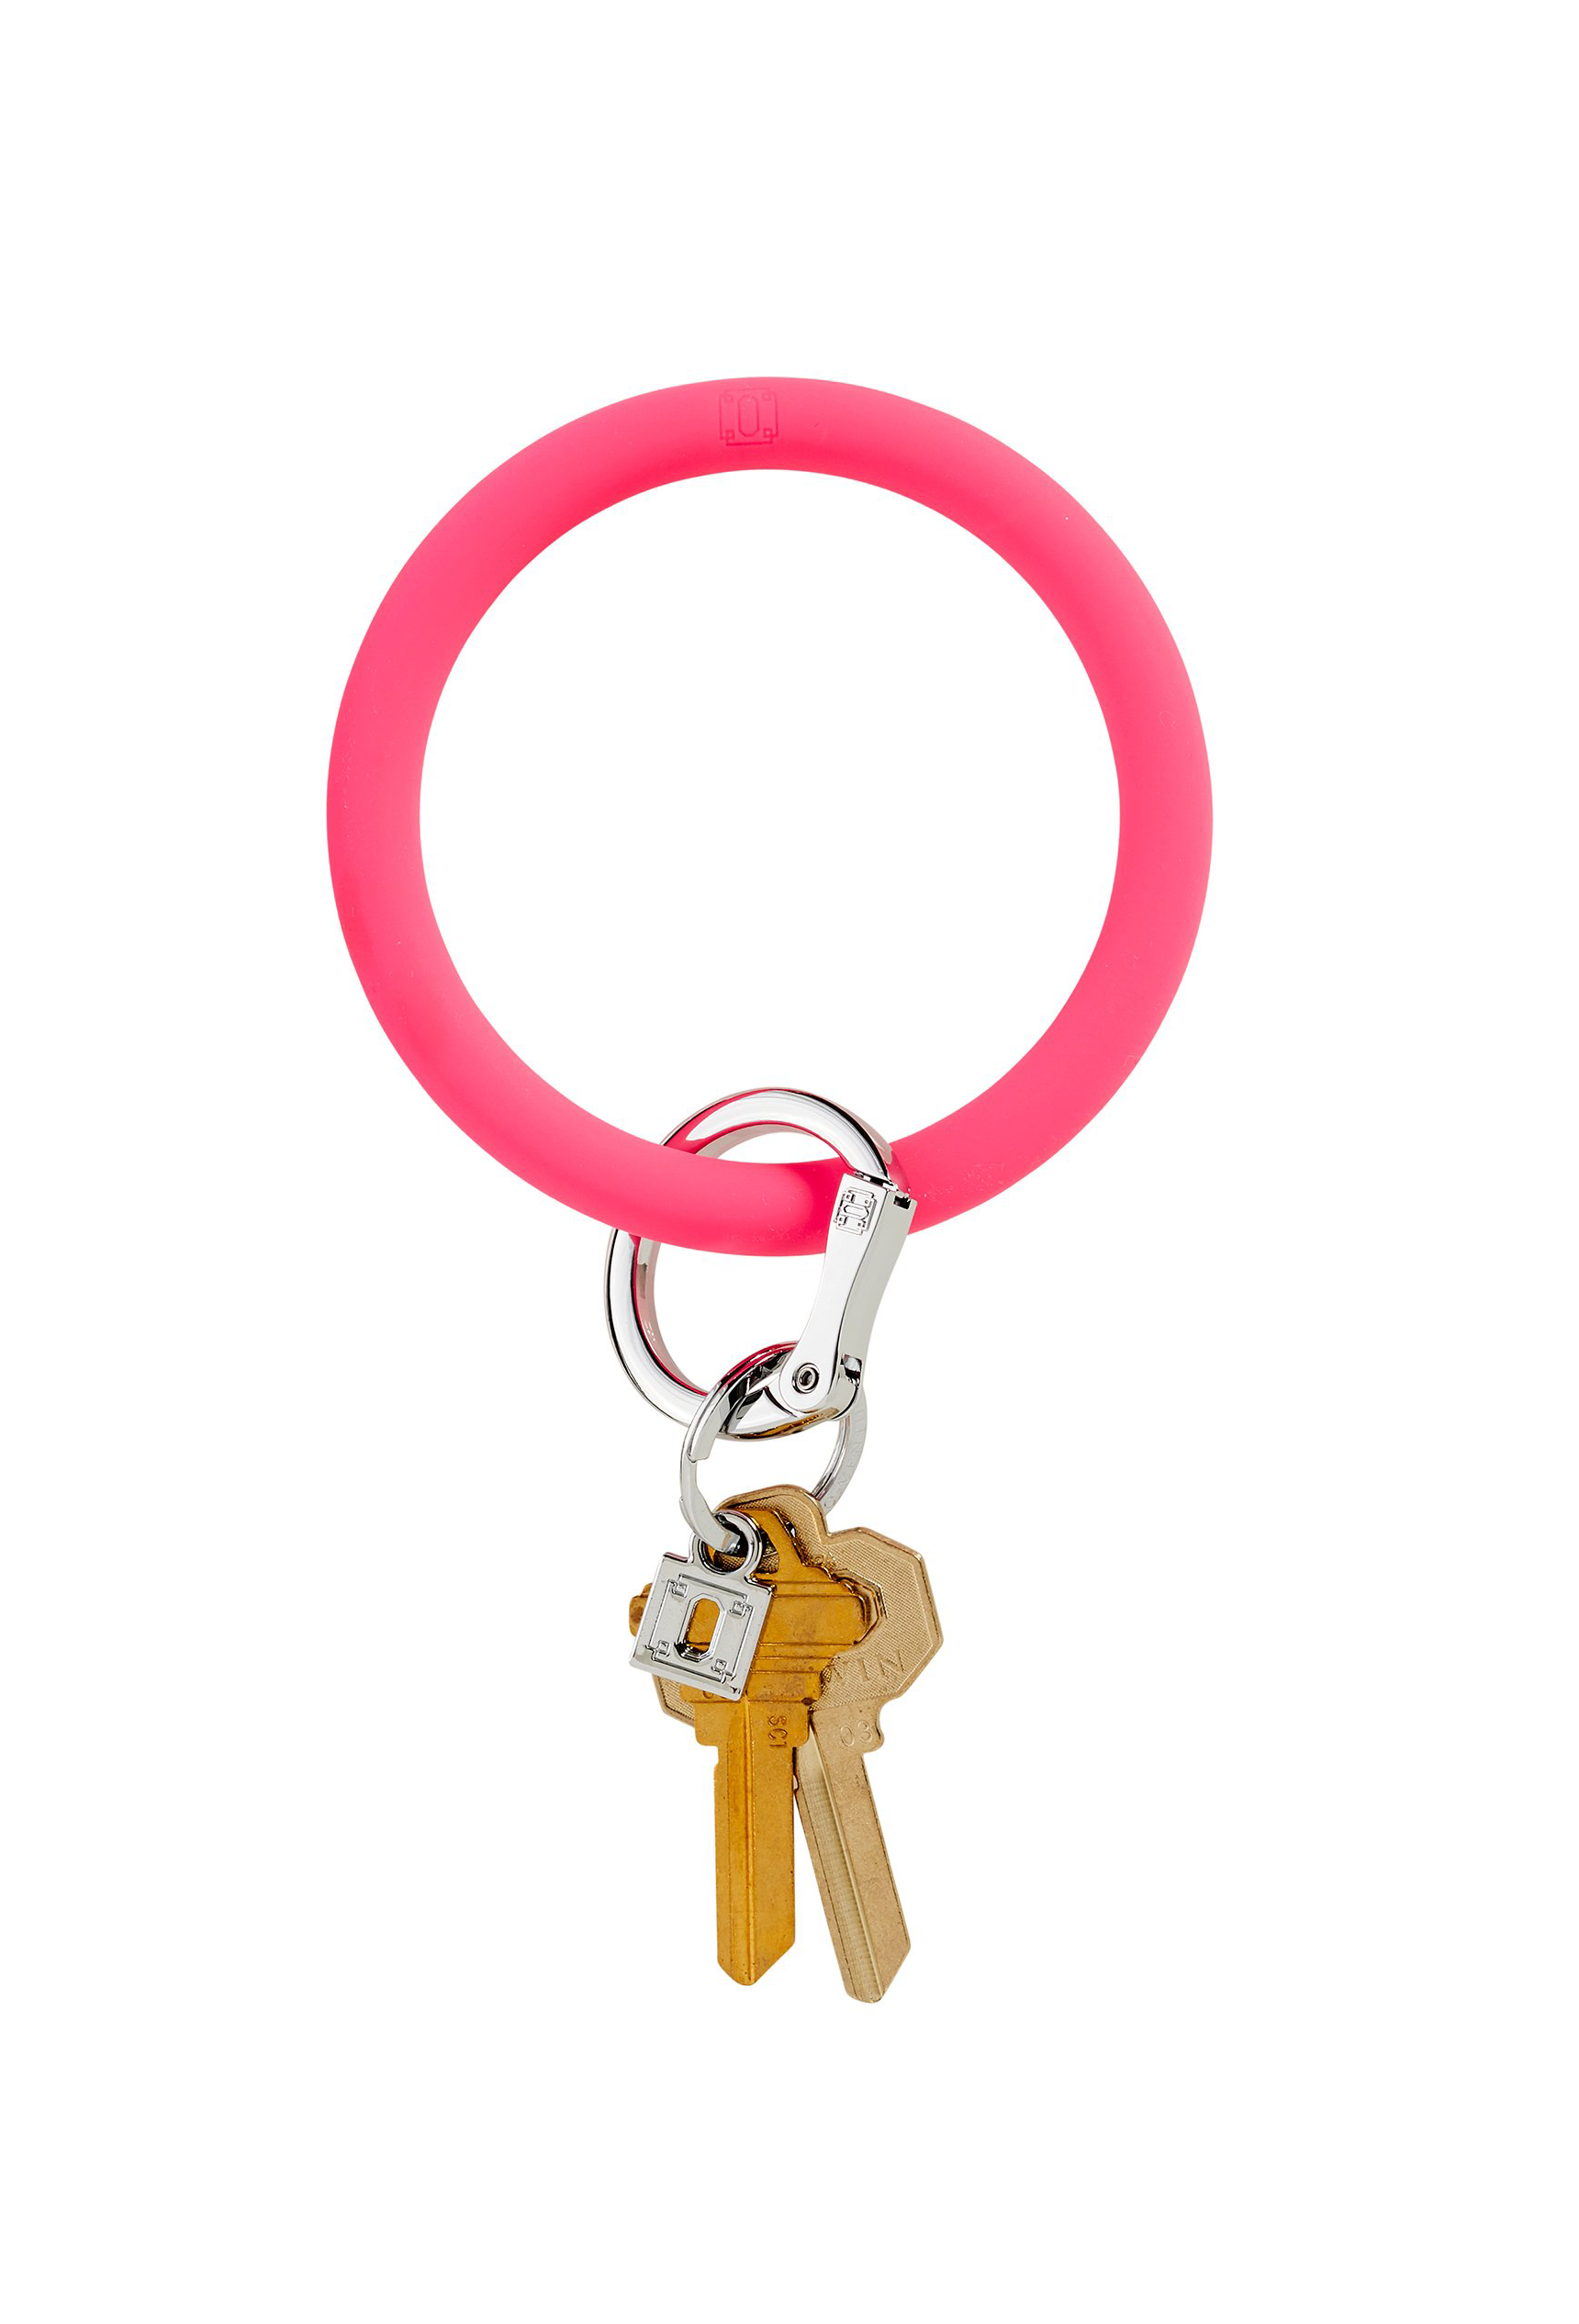 Neon pink silicone key ring, o-venture silicone key ring in tickled pink